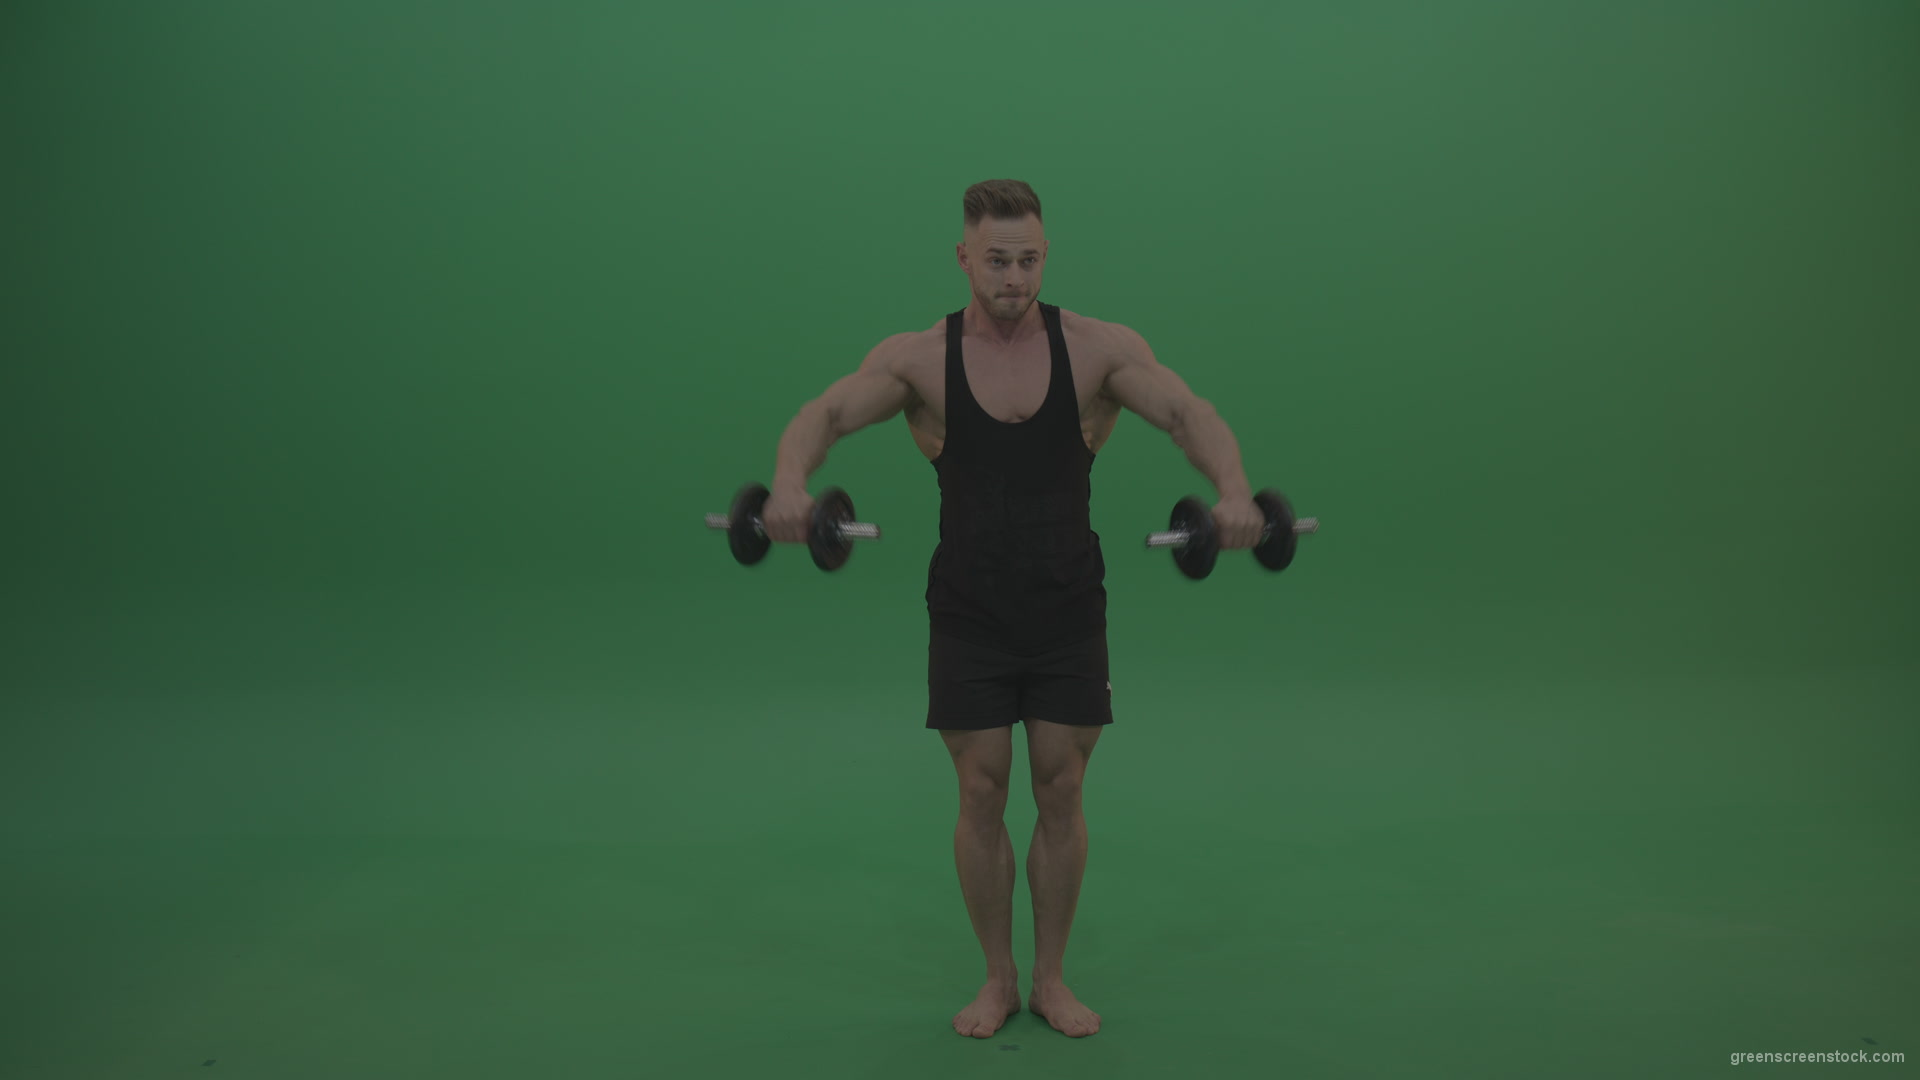 Young_Handsome_Athlete_Warming_Up_Pectoral_Muscles_Dumbbell_Pull_Ups_Workout_On_Green_Screen_Chroma_Key_Wall_Background_005 Green Screen Stock